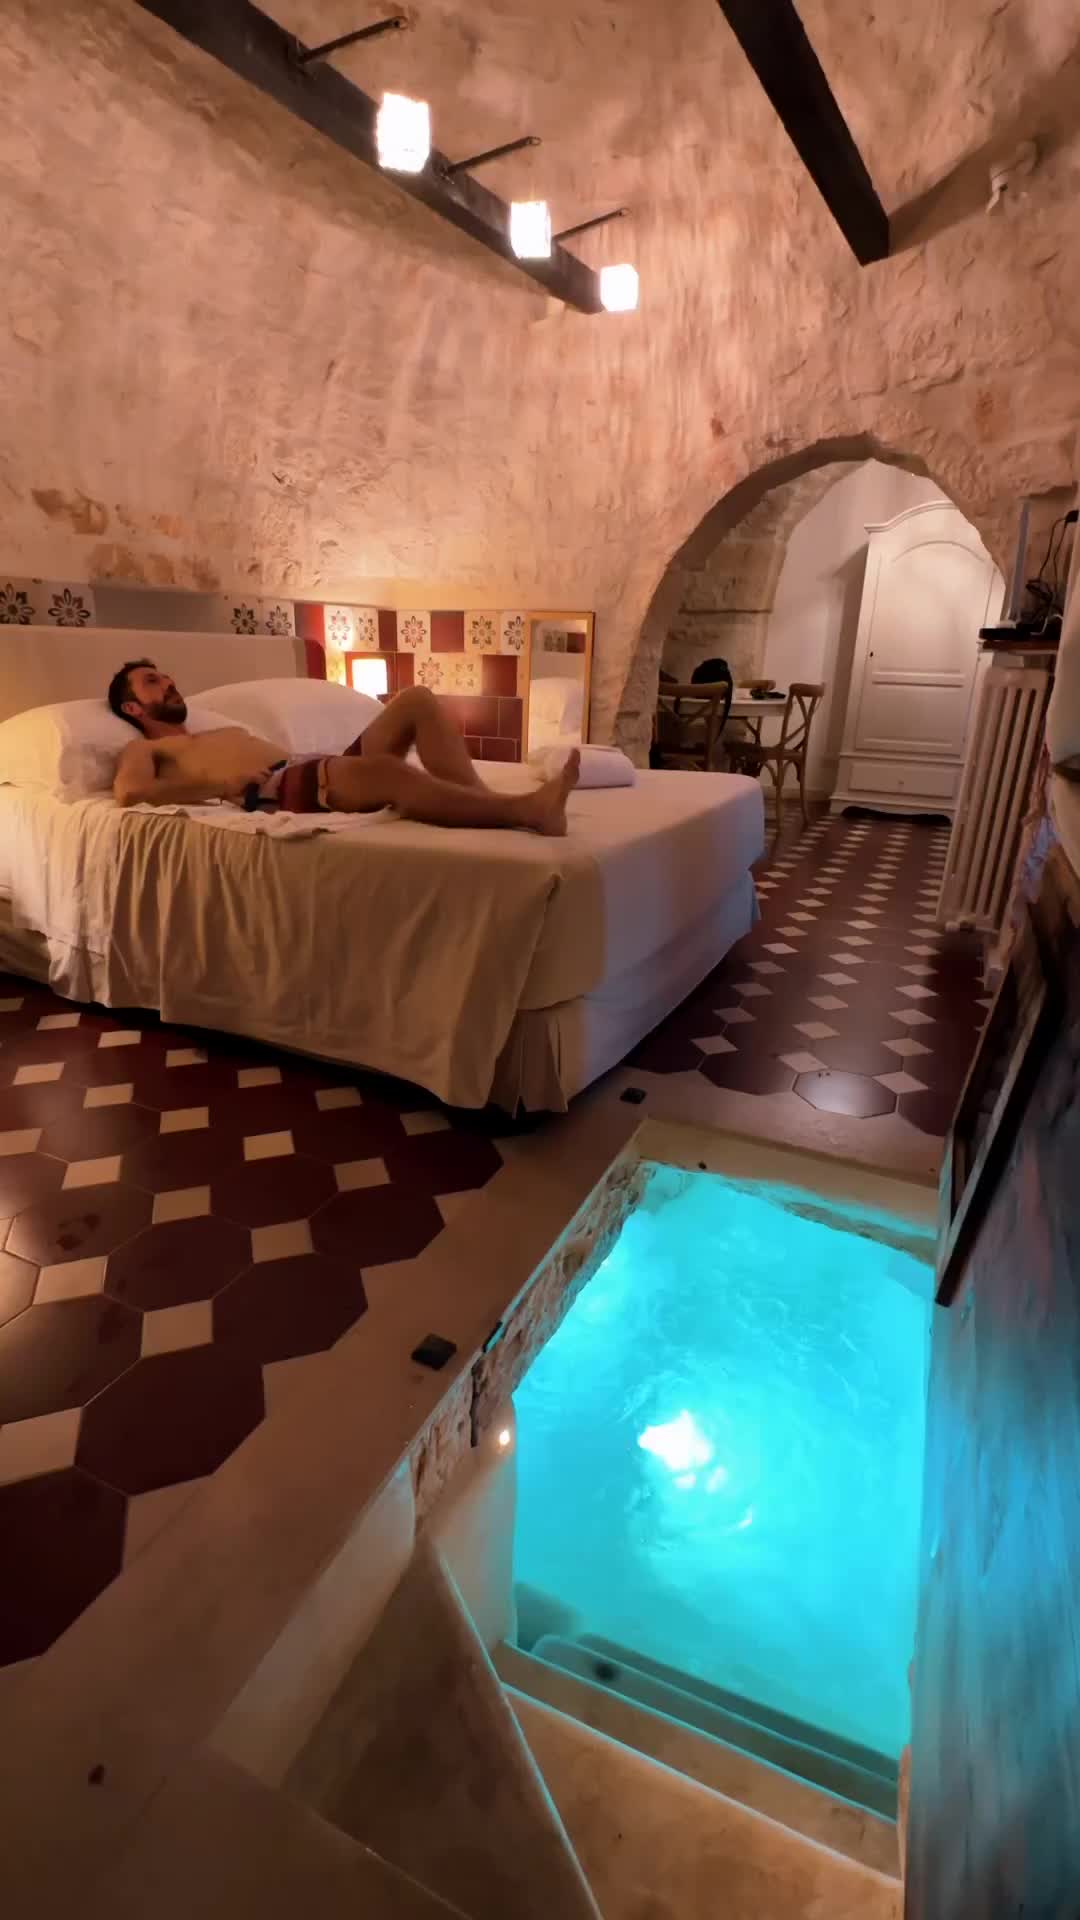 Relax in a 300-Year-Old Trullo's Underground Pool